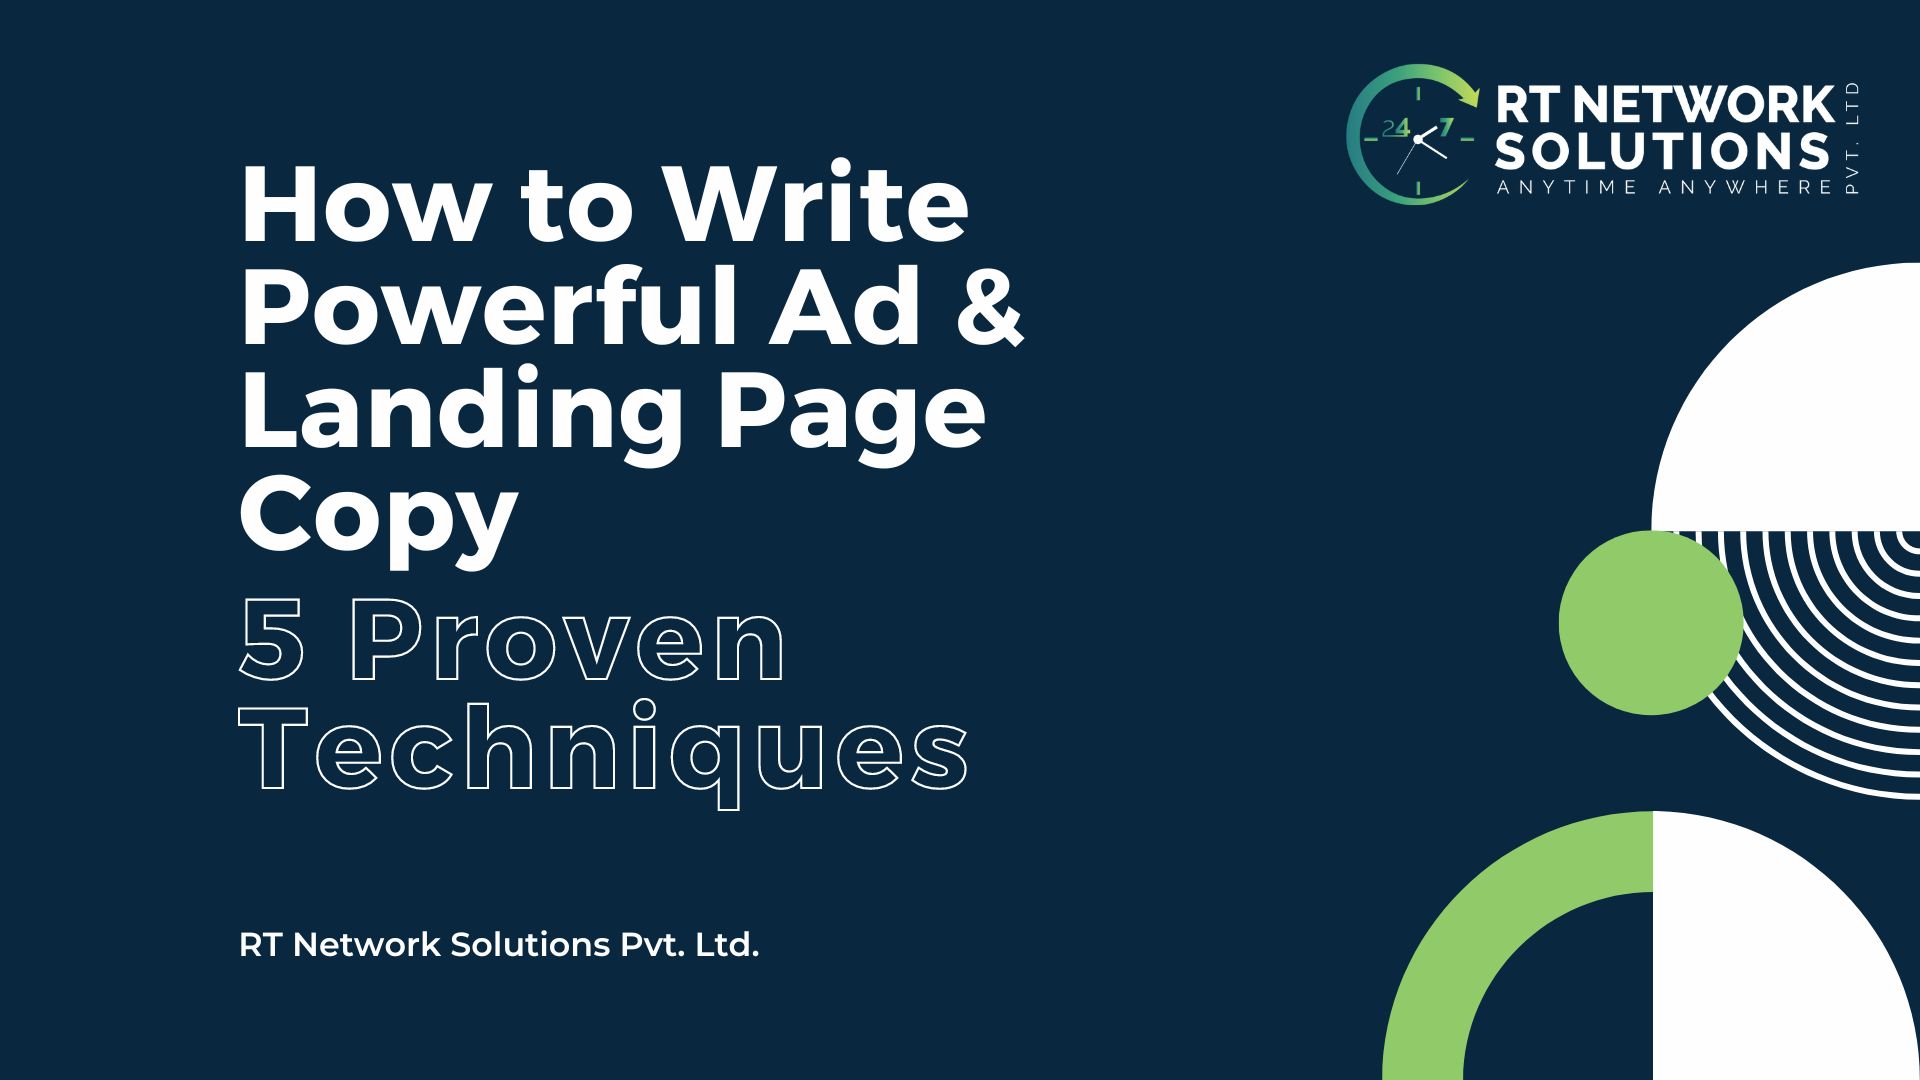 How to write powerful ad & Landing Page Copy